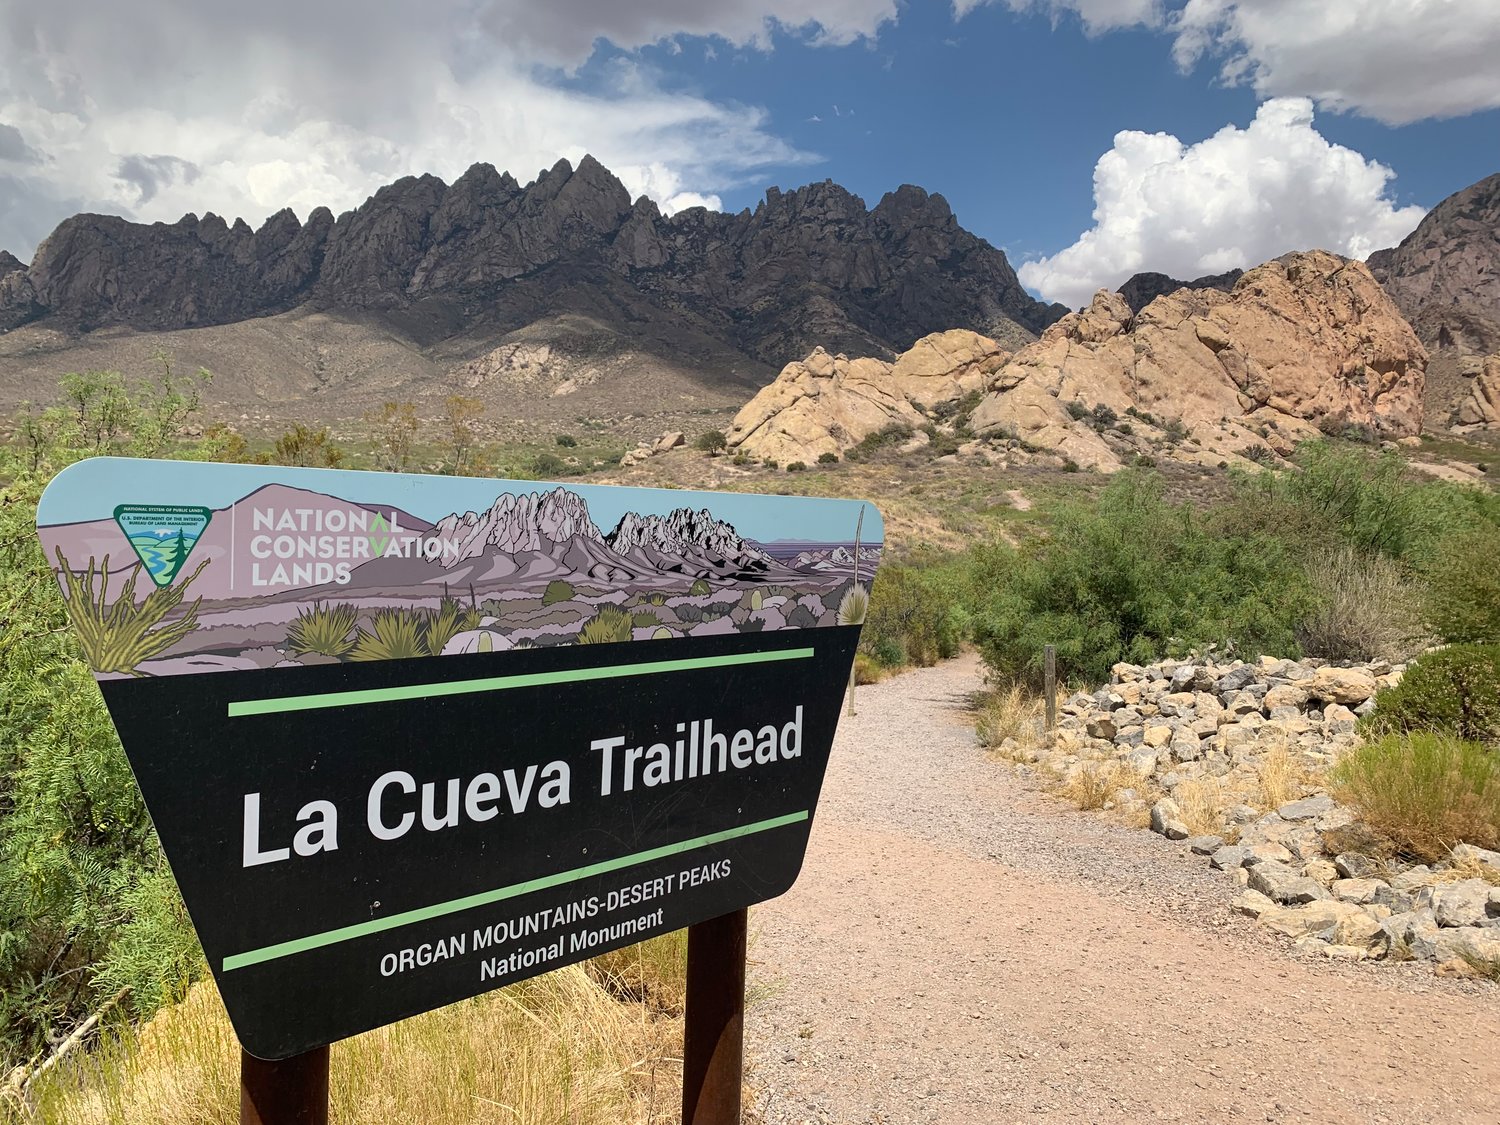 A grant will help pave a section of the La Cueva trail near Dripping Springs.